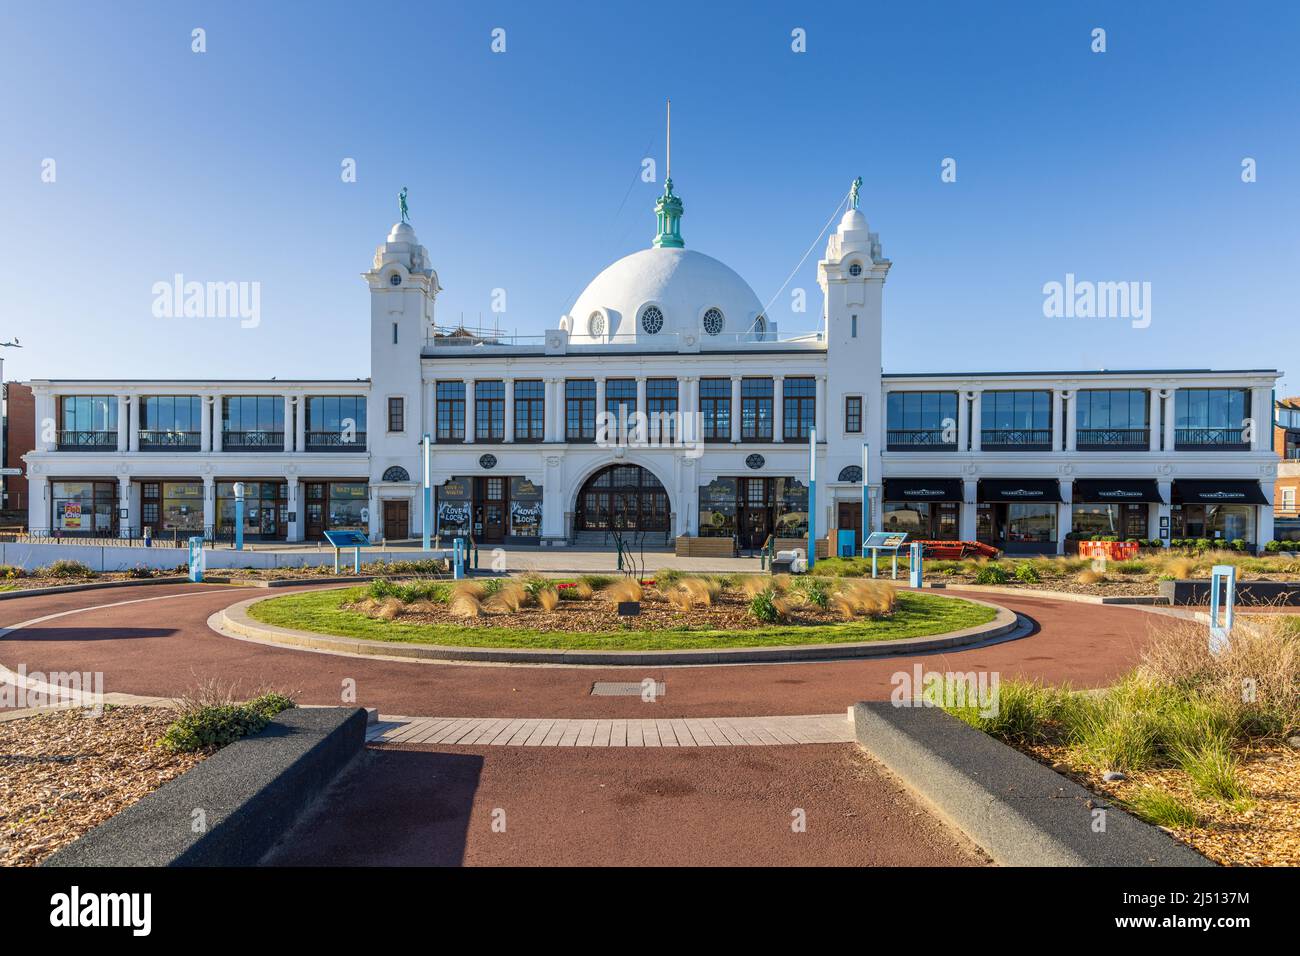 The famous landmark renaissance-styled domed Spanish City building is a dining and leisure centre on the seafront in Whitley Bay, North Tyneside. Stock Photo